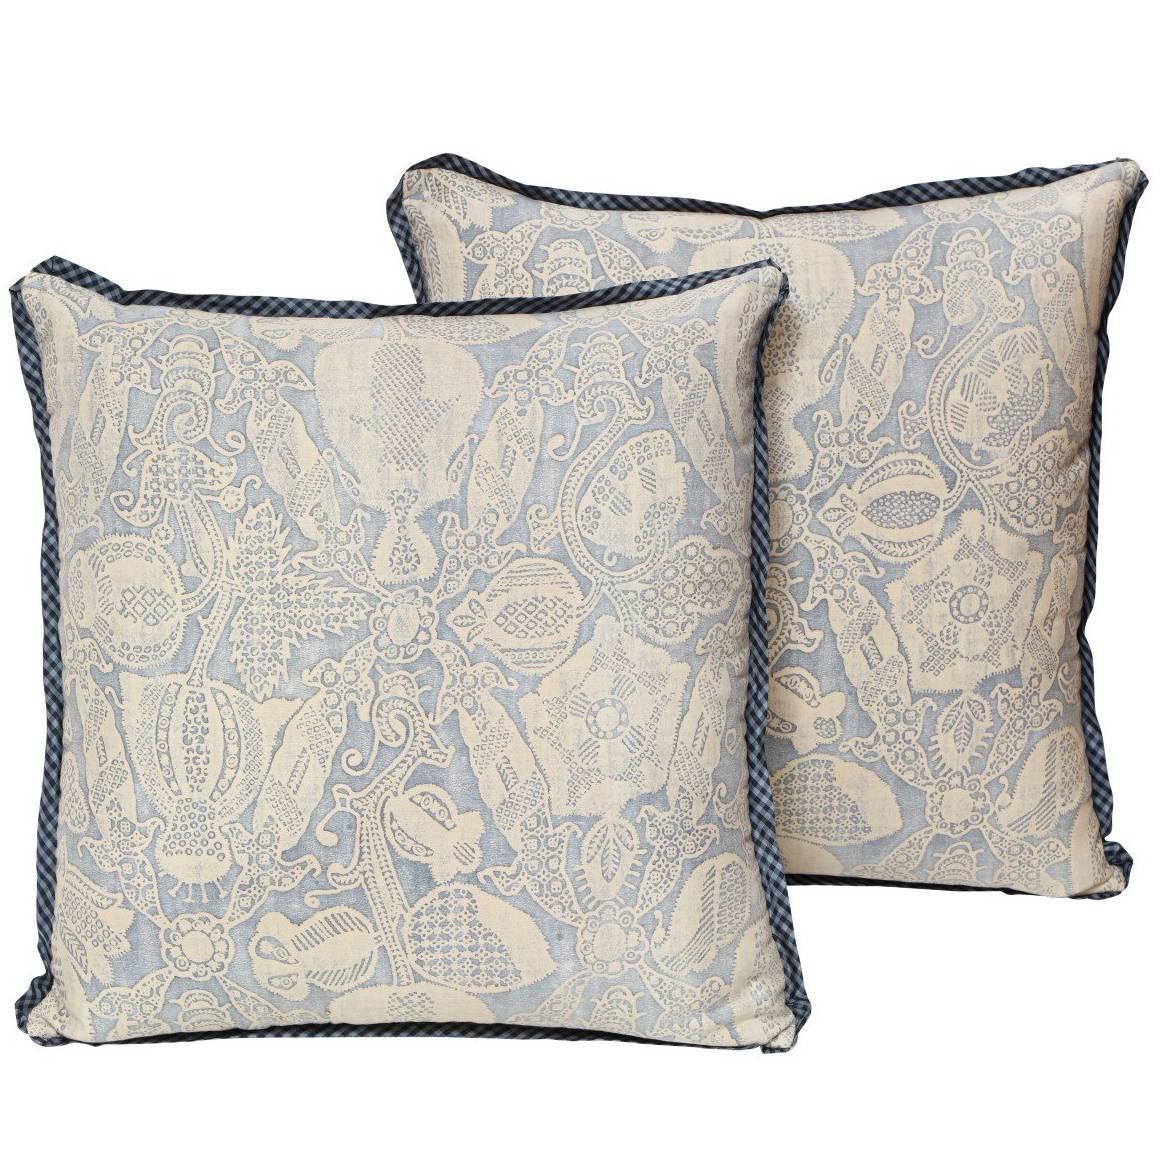 A Pair of Rare Early Fortuny Fabric Cushions 